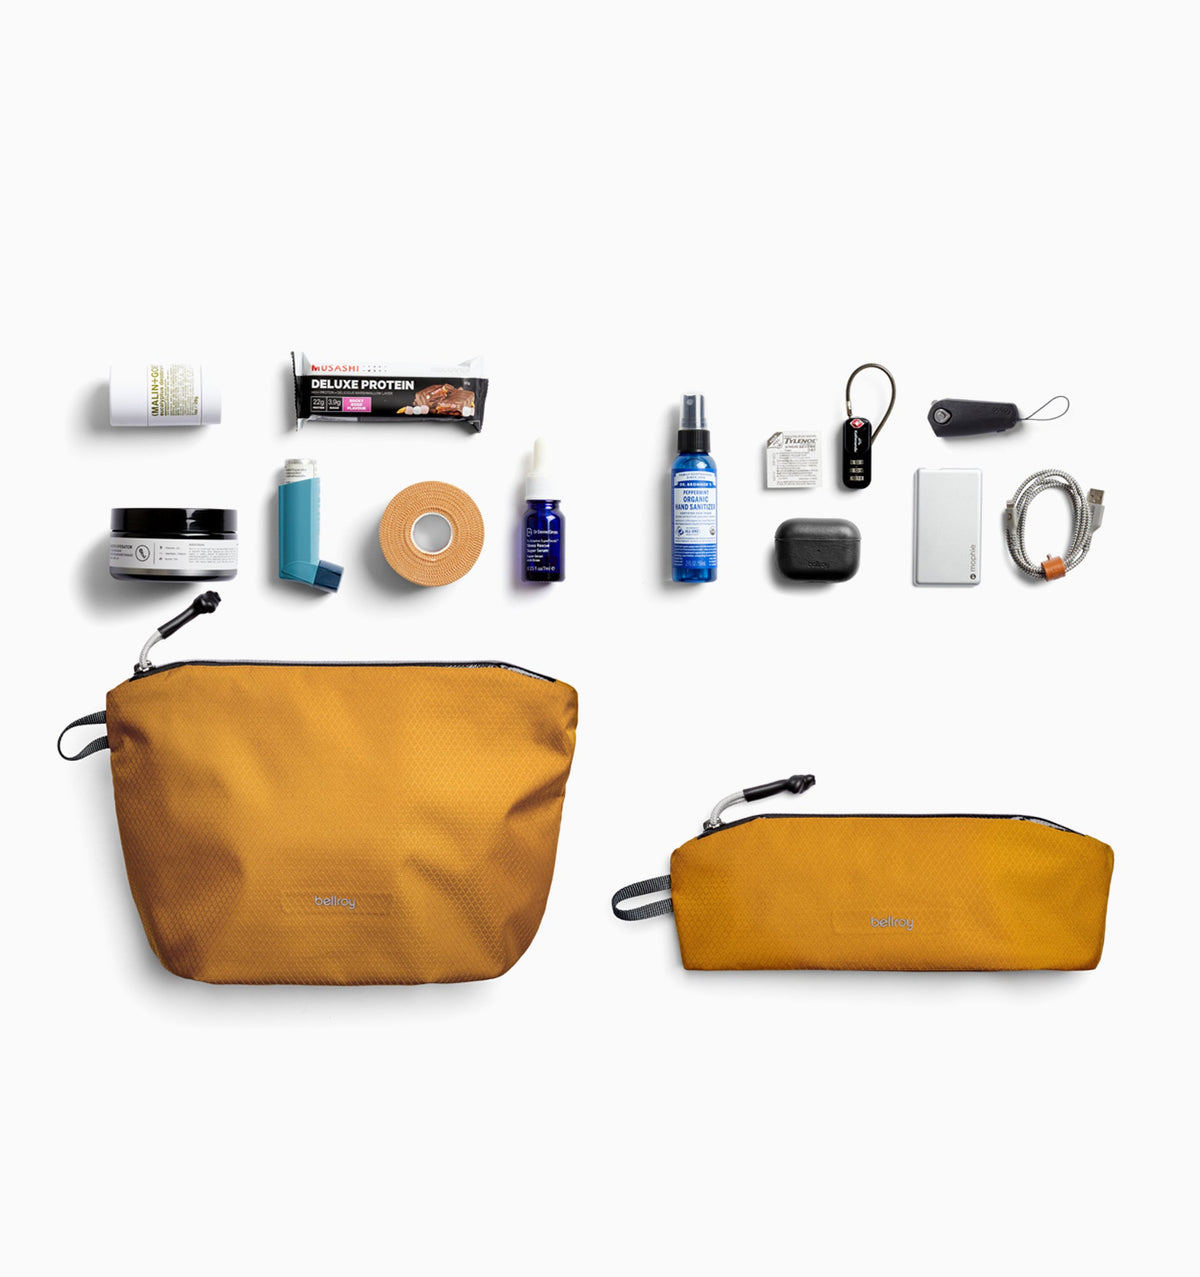 Bellroy Lite Pouch Duo - Copper